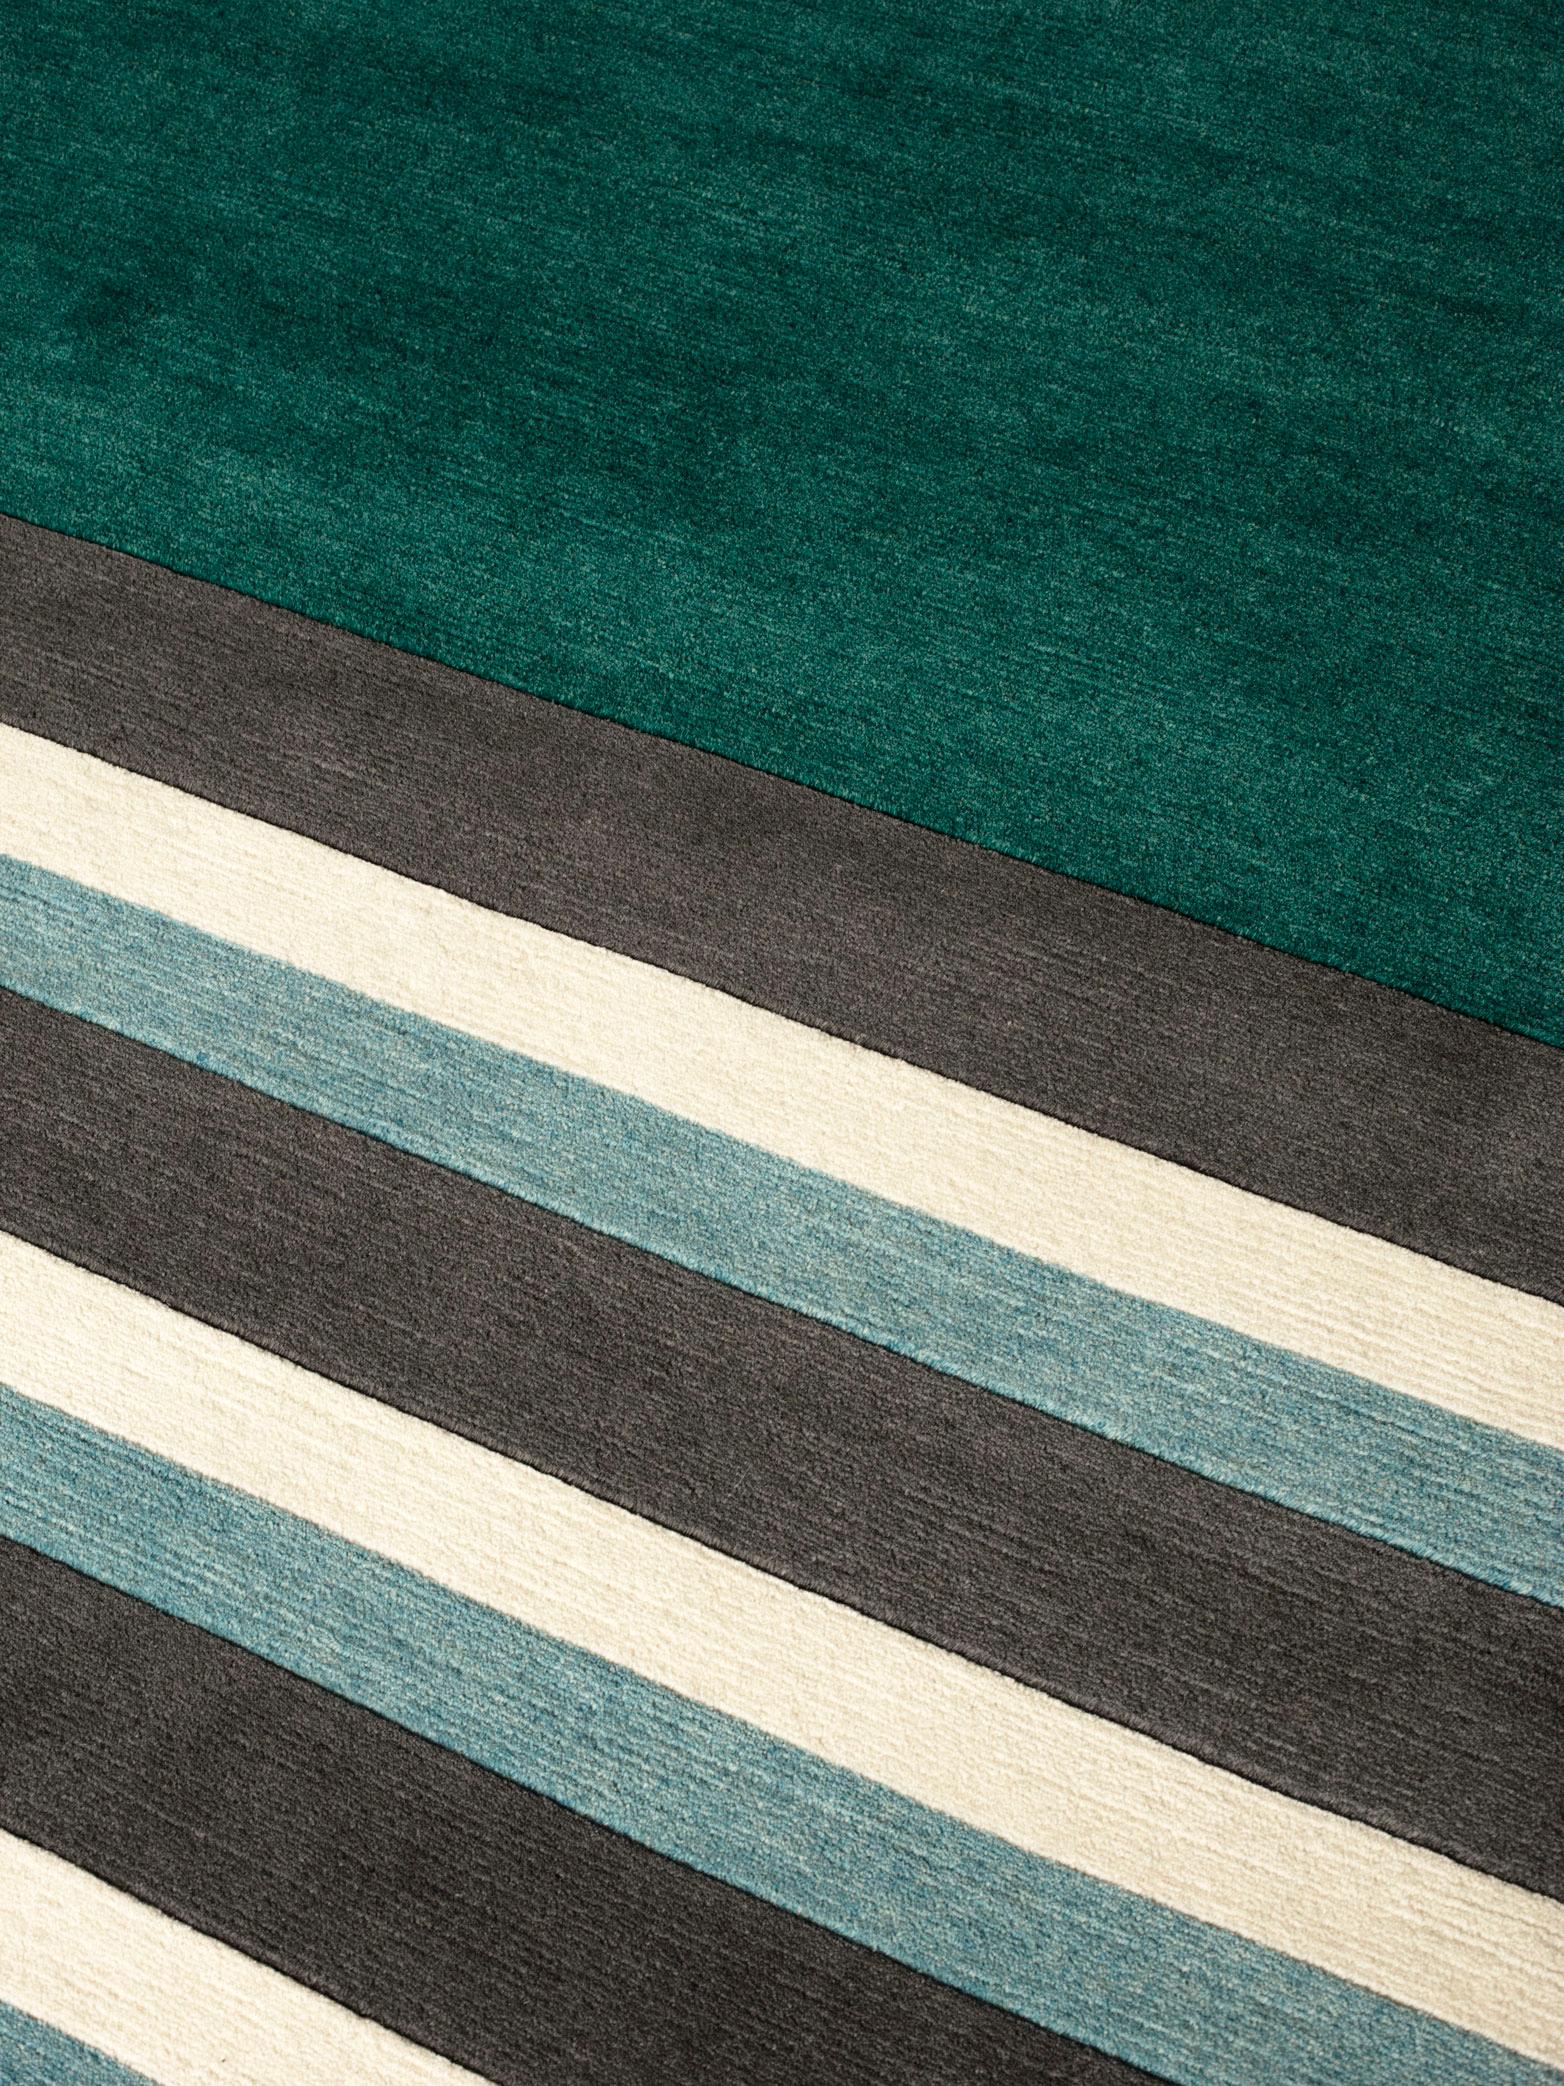 cc-tapis launches the Les Arcs Collection by French designer and architect Charlotte Perriand featuring 5 new rug designs and unseen archives in an all-encompassing exhibition curated by Dan Thawley, editor in chief of magazine “A magazine curated